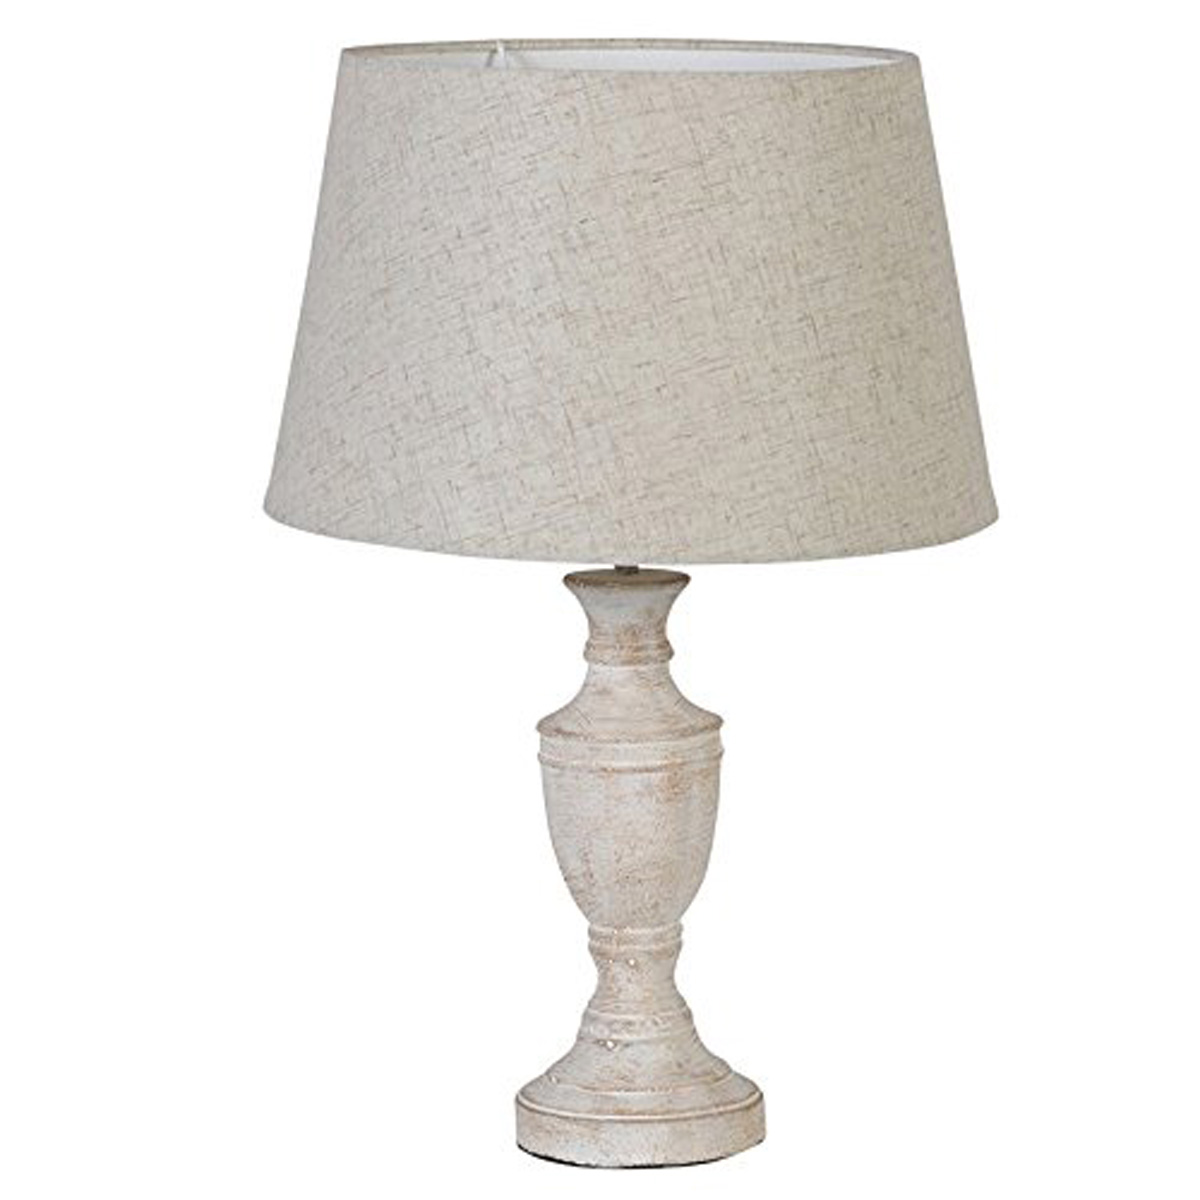 Antique White Wash Slim Table Lamp, White Washed Wood Table Lamps